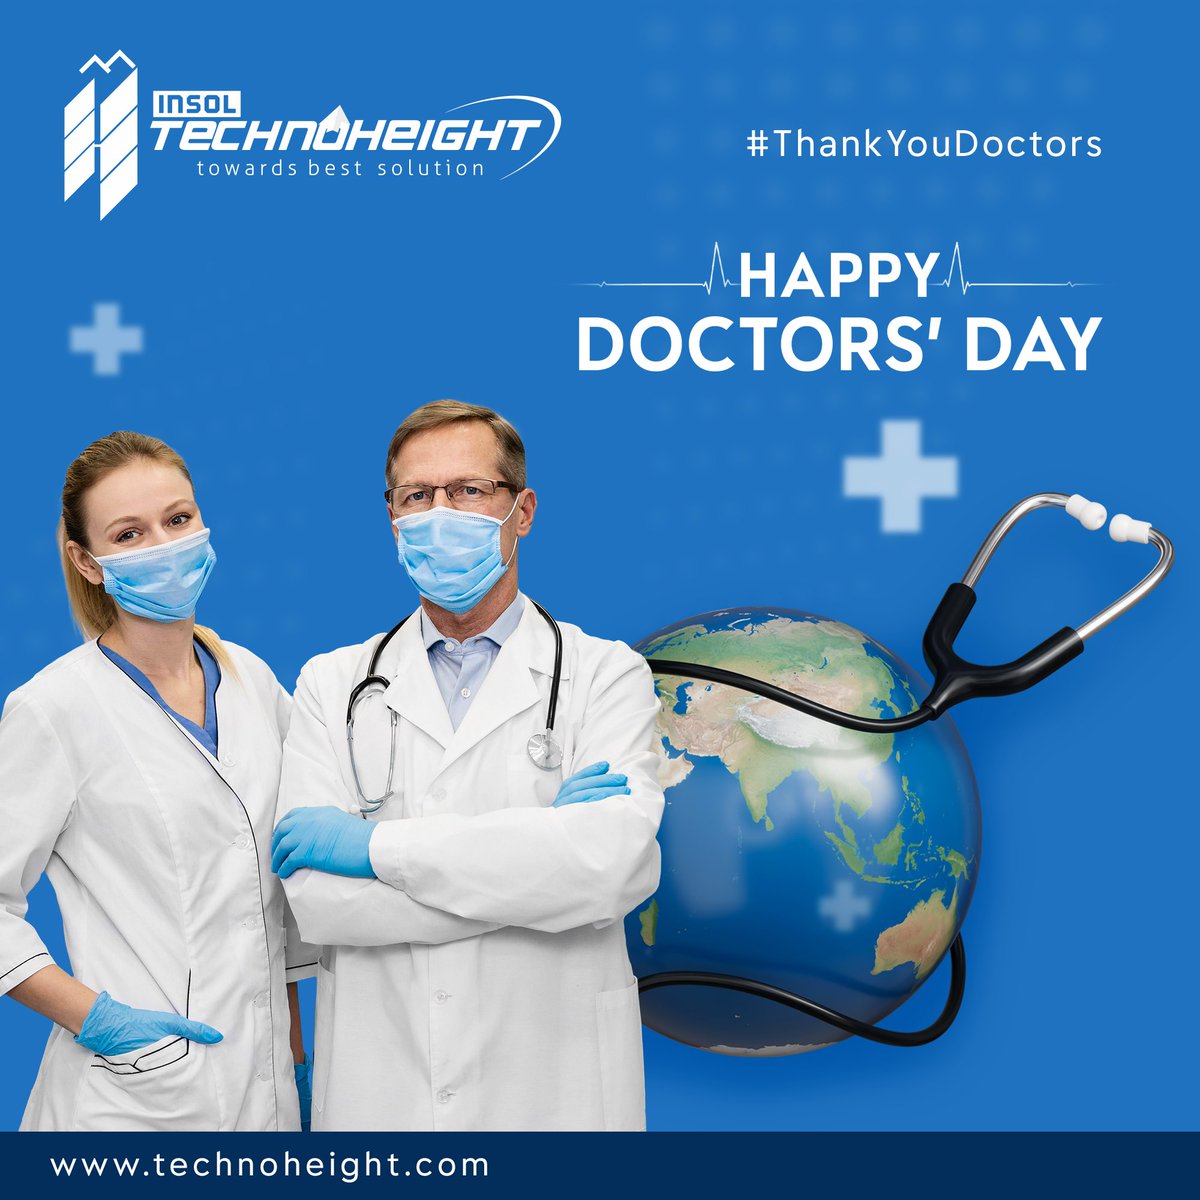 On Doctor's Day, we sincerely appreciate doctors for their selfless service. At Technoheight, our exceptional outsourcing solutions support global healthcare practices. #HappyDoctorsDay #medicalcoding #medicalbilling #medicalbillingservices #medicaltranscription #medicalscribing